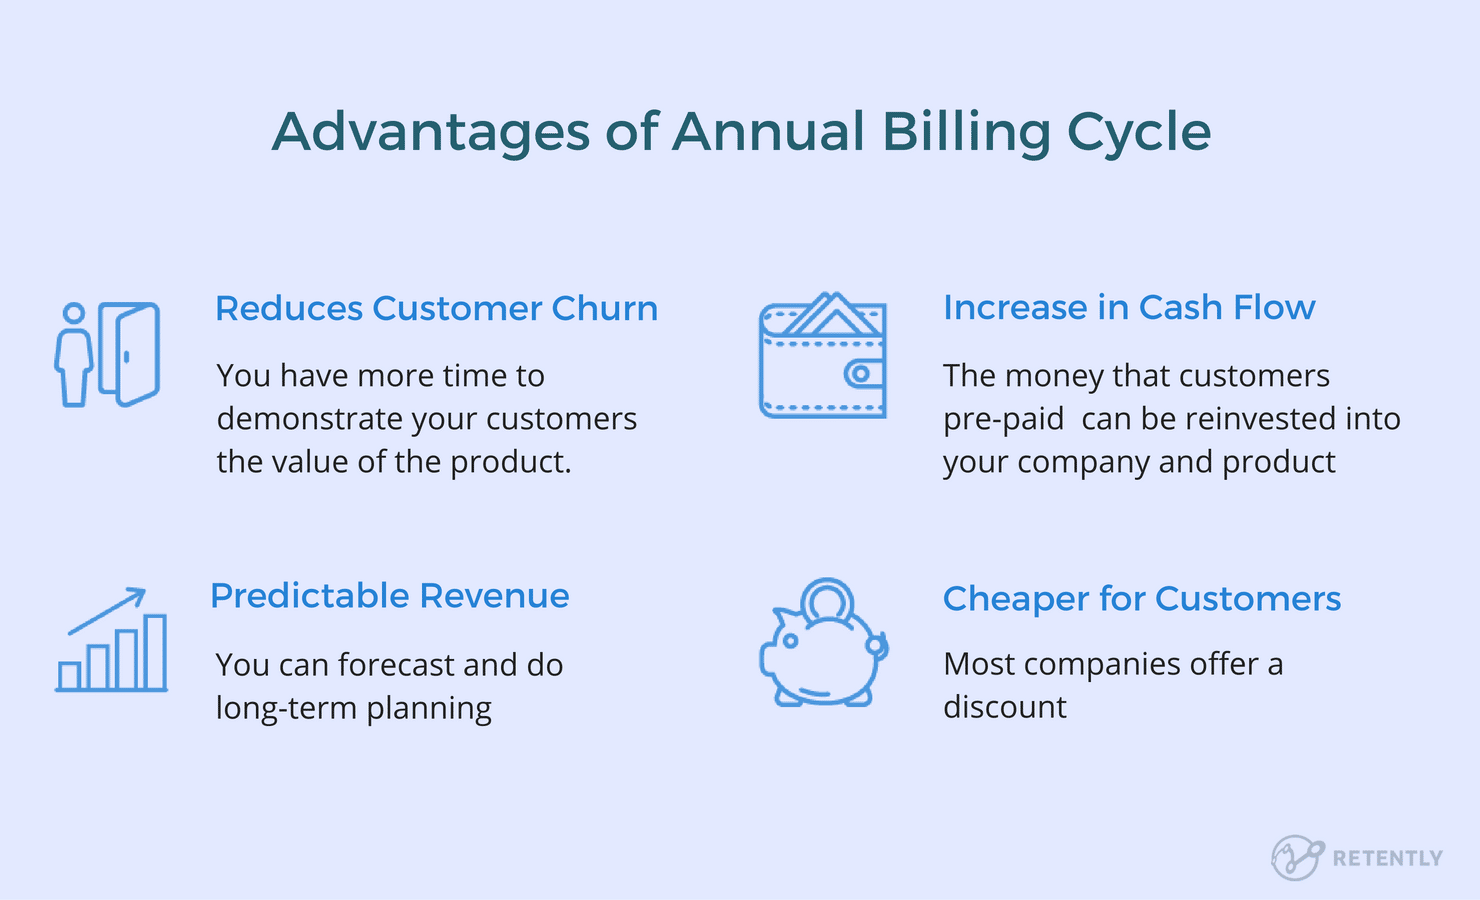 annual billing cycle advantages